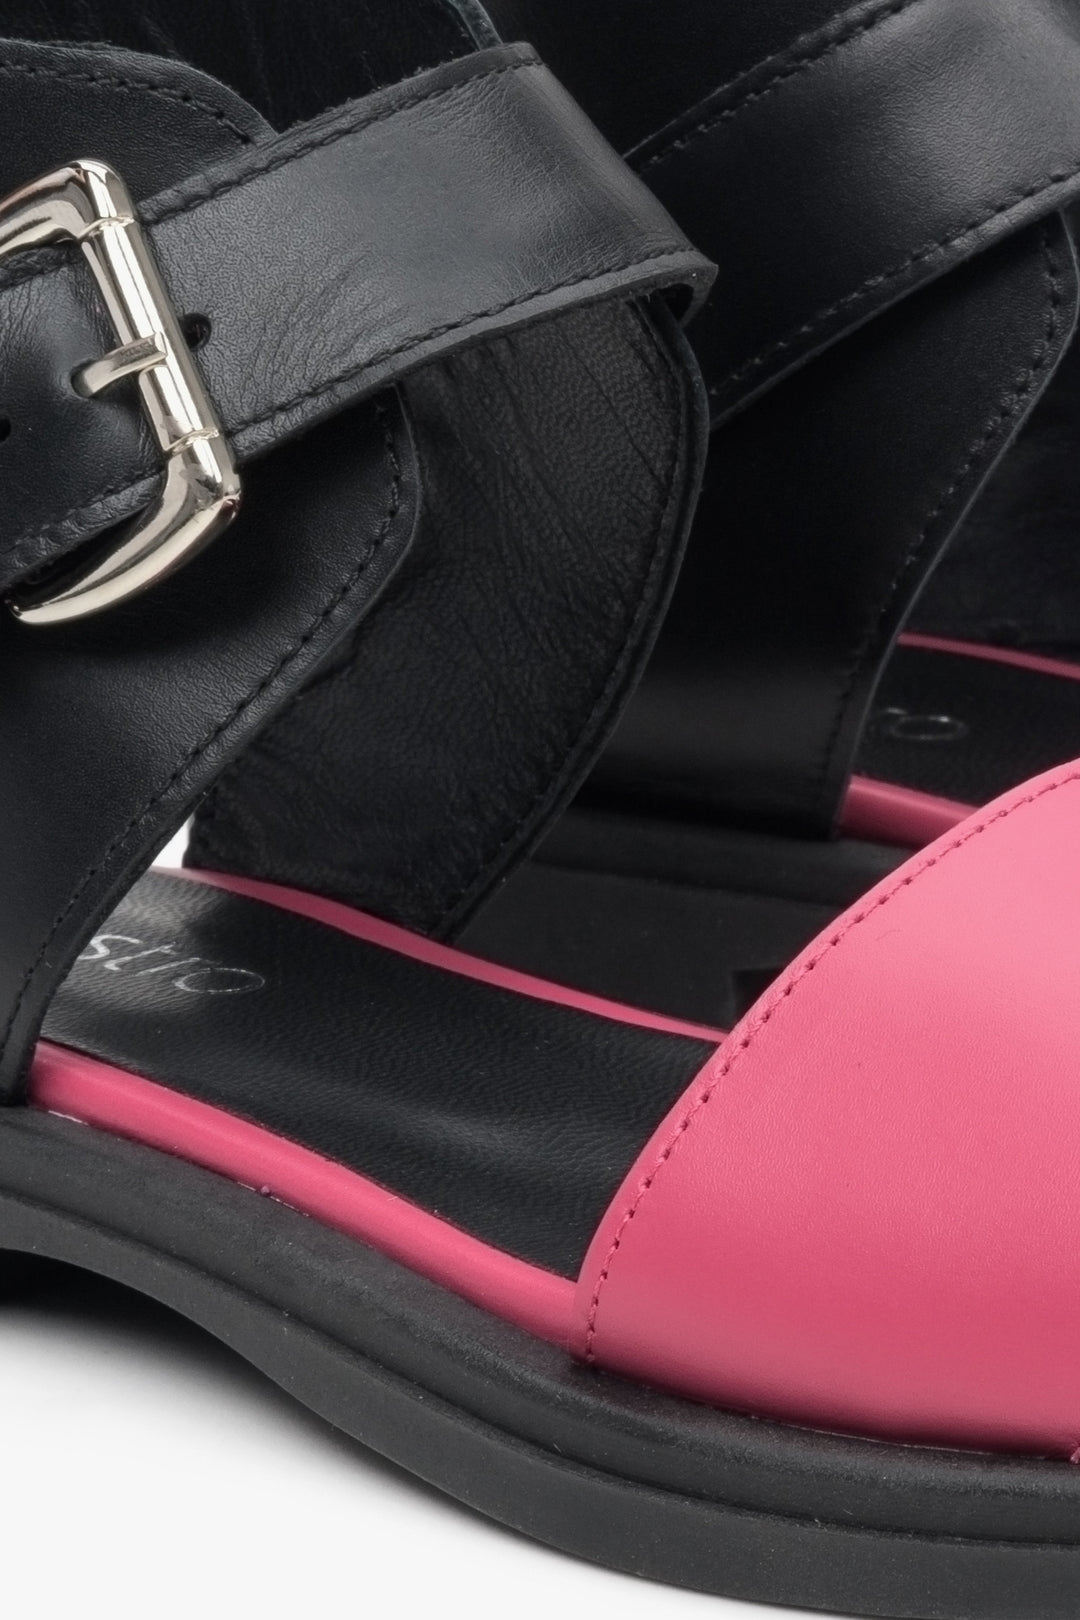 Women's Estro pink and black leather sandals - close-up of details.